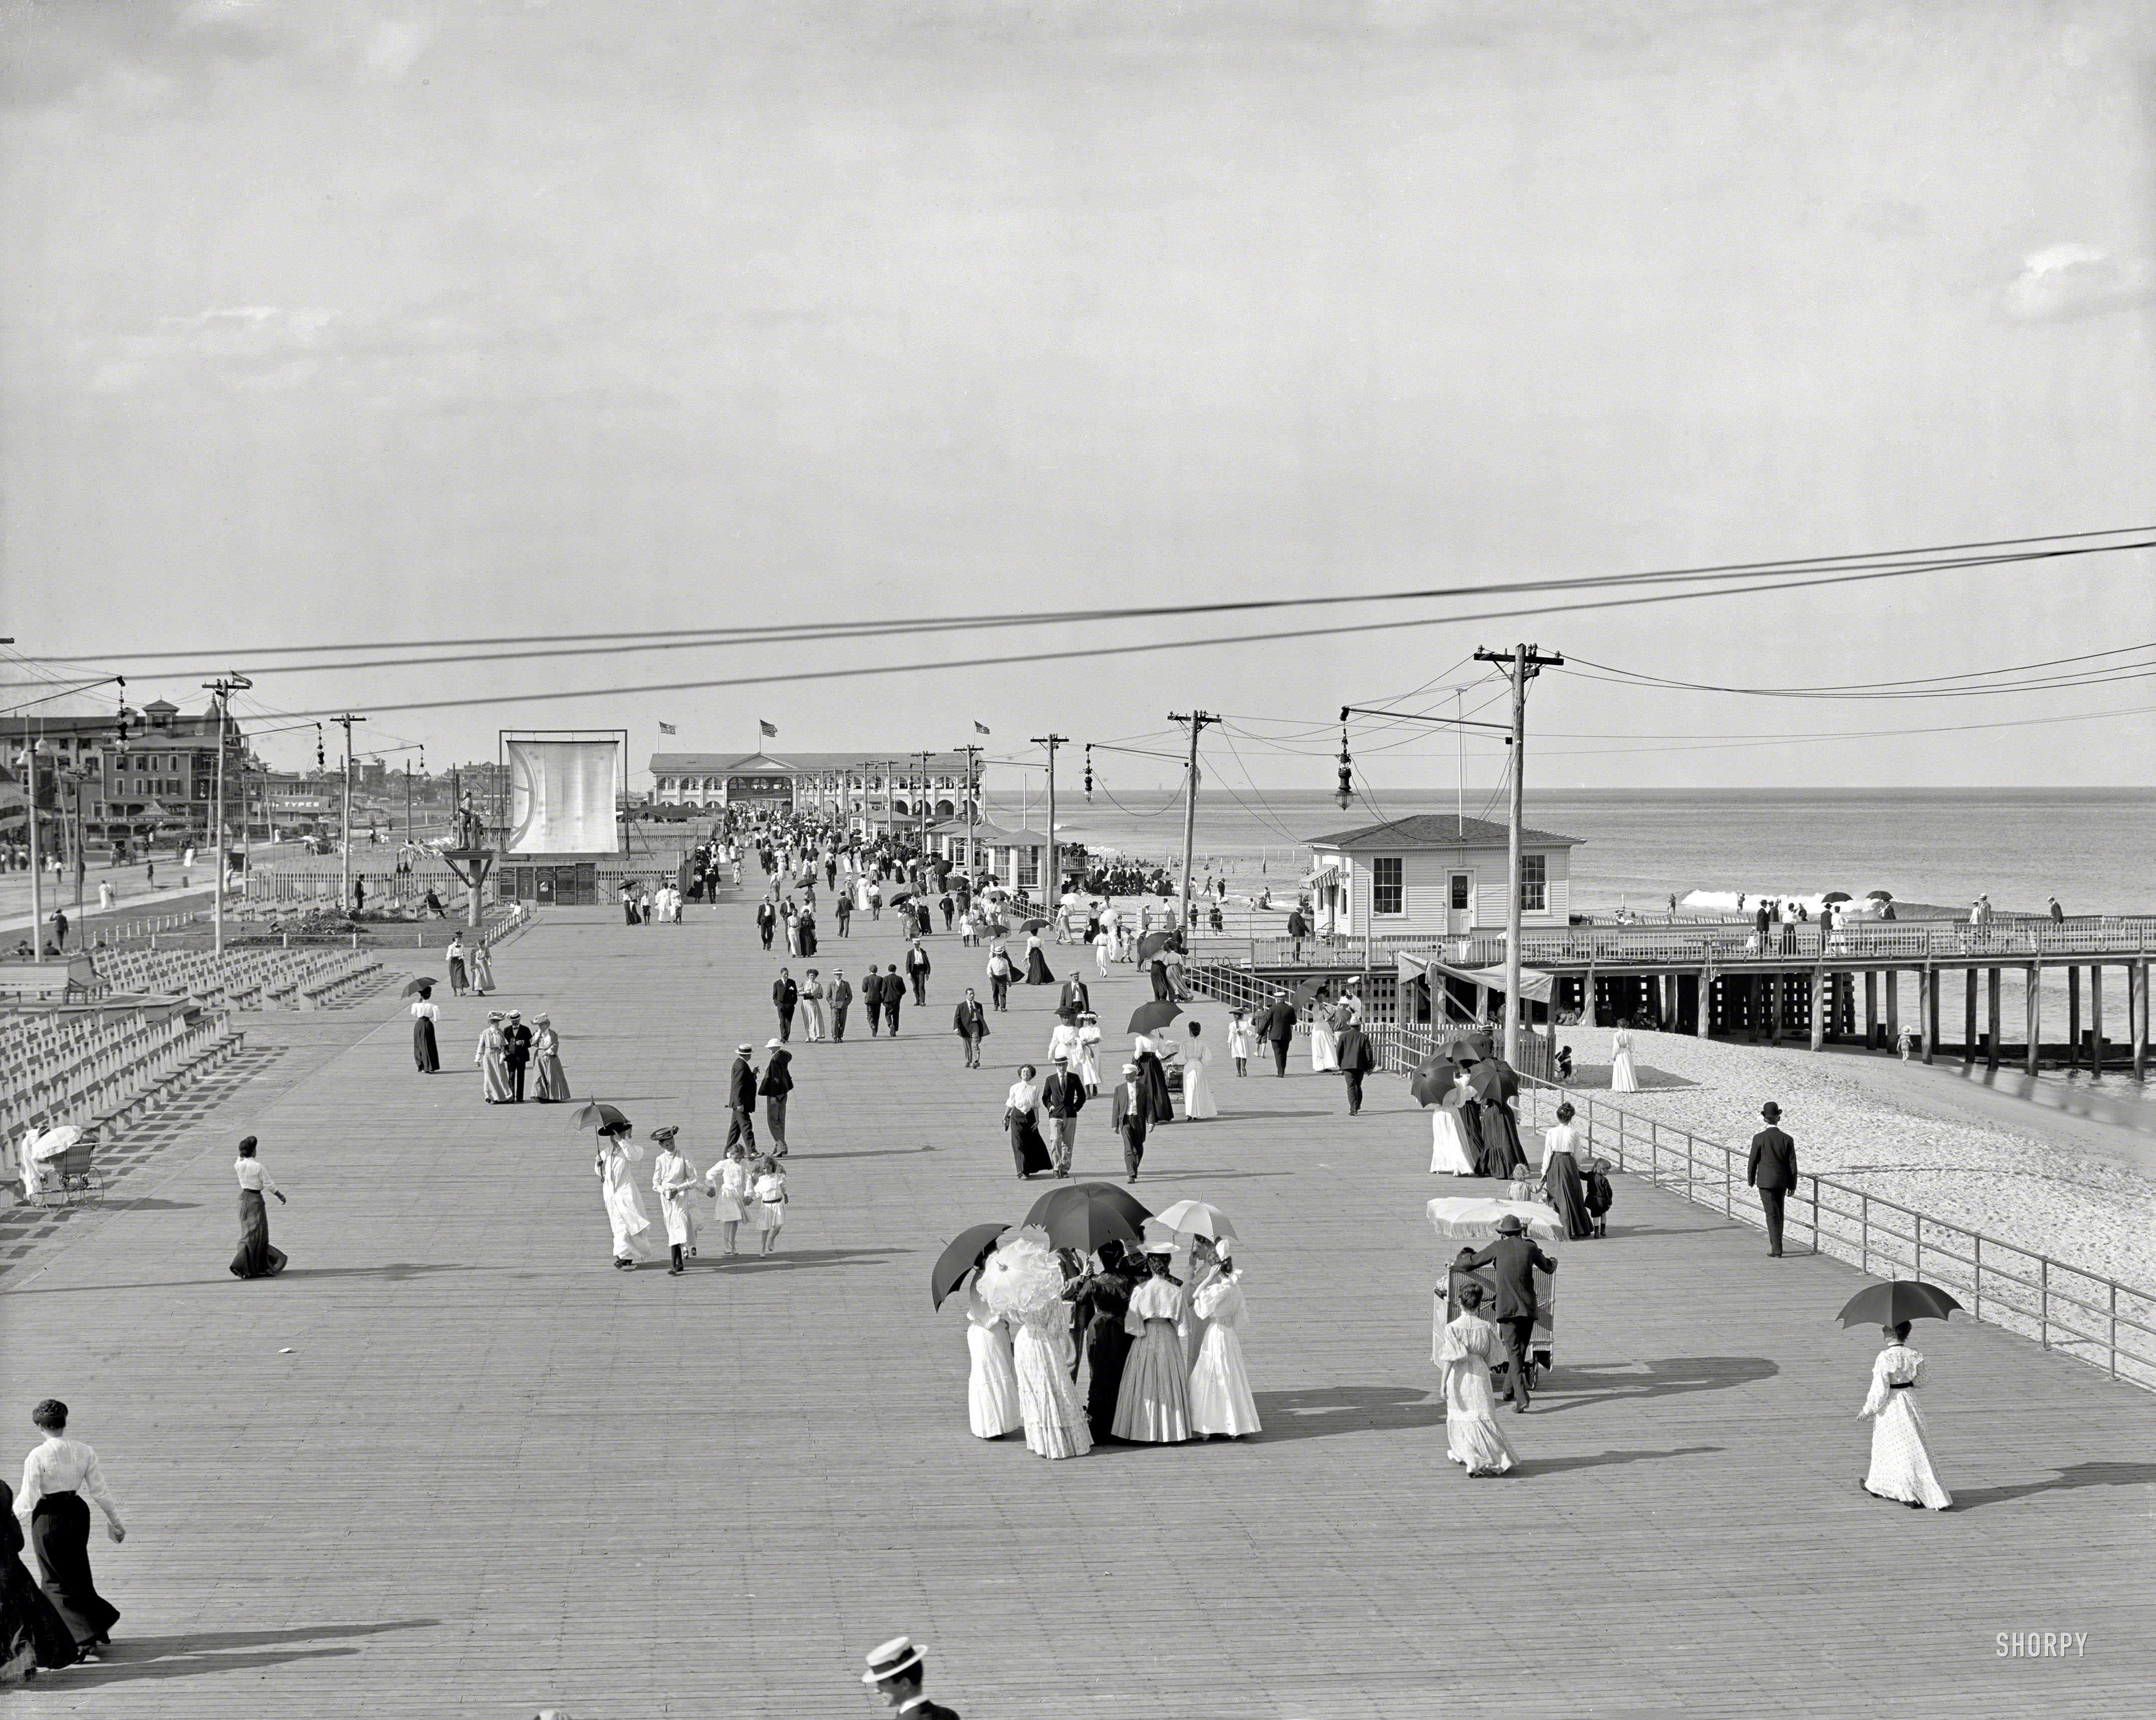 The Jersey Shore circa 1905. "Boardwalk at Asbury Park." Live it up while you can, folks. 8x10 inch glass negative, Detroit Publishing Company. View full size.